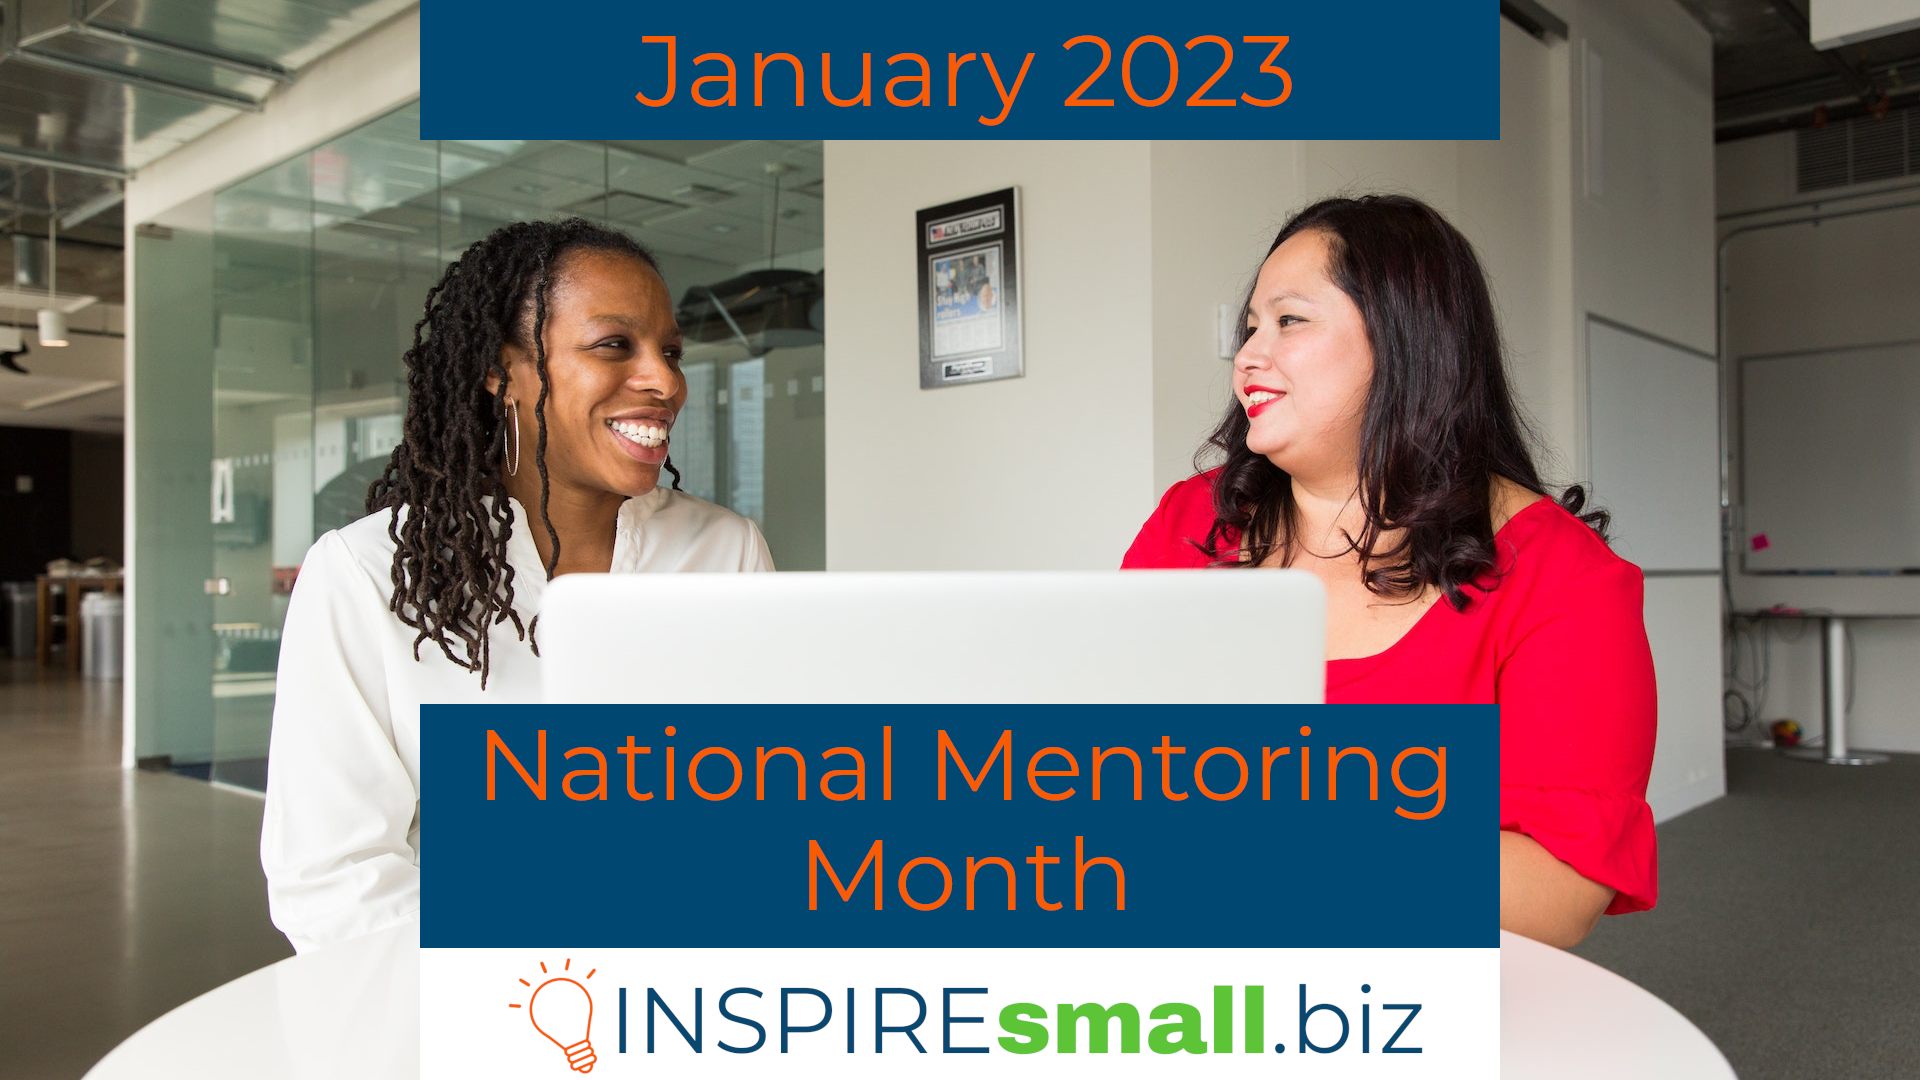 National Mentoring Month – January 2023 Networking & Events